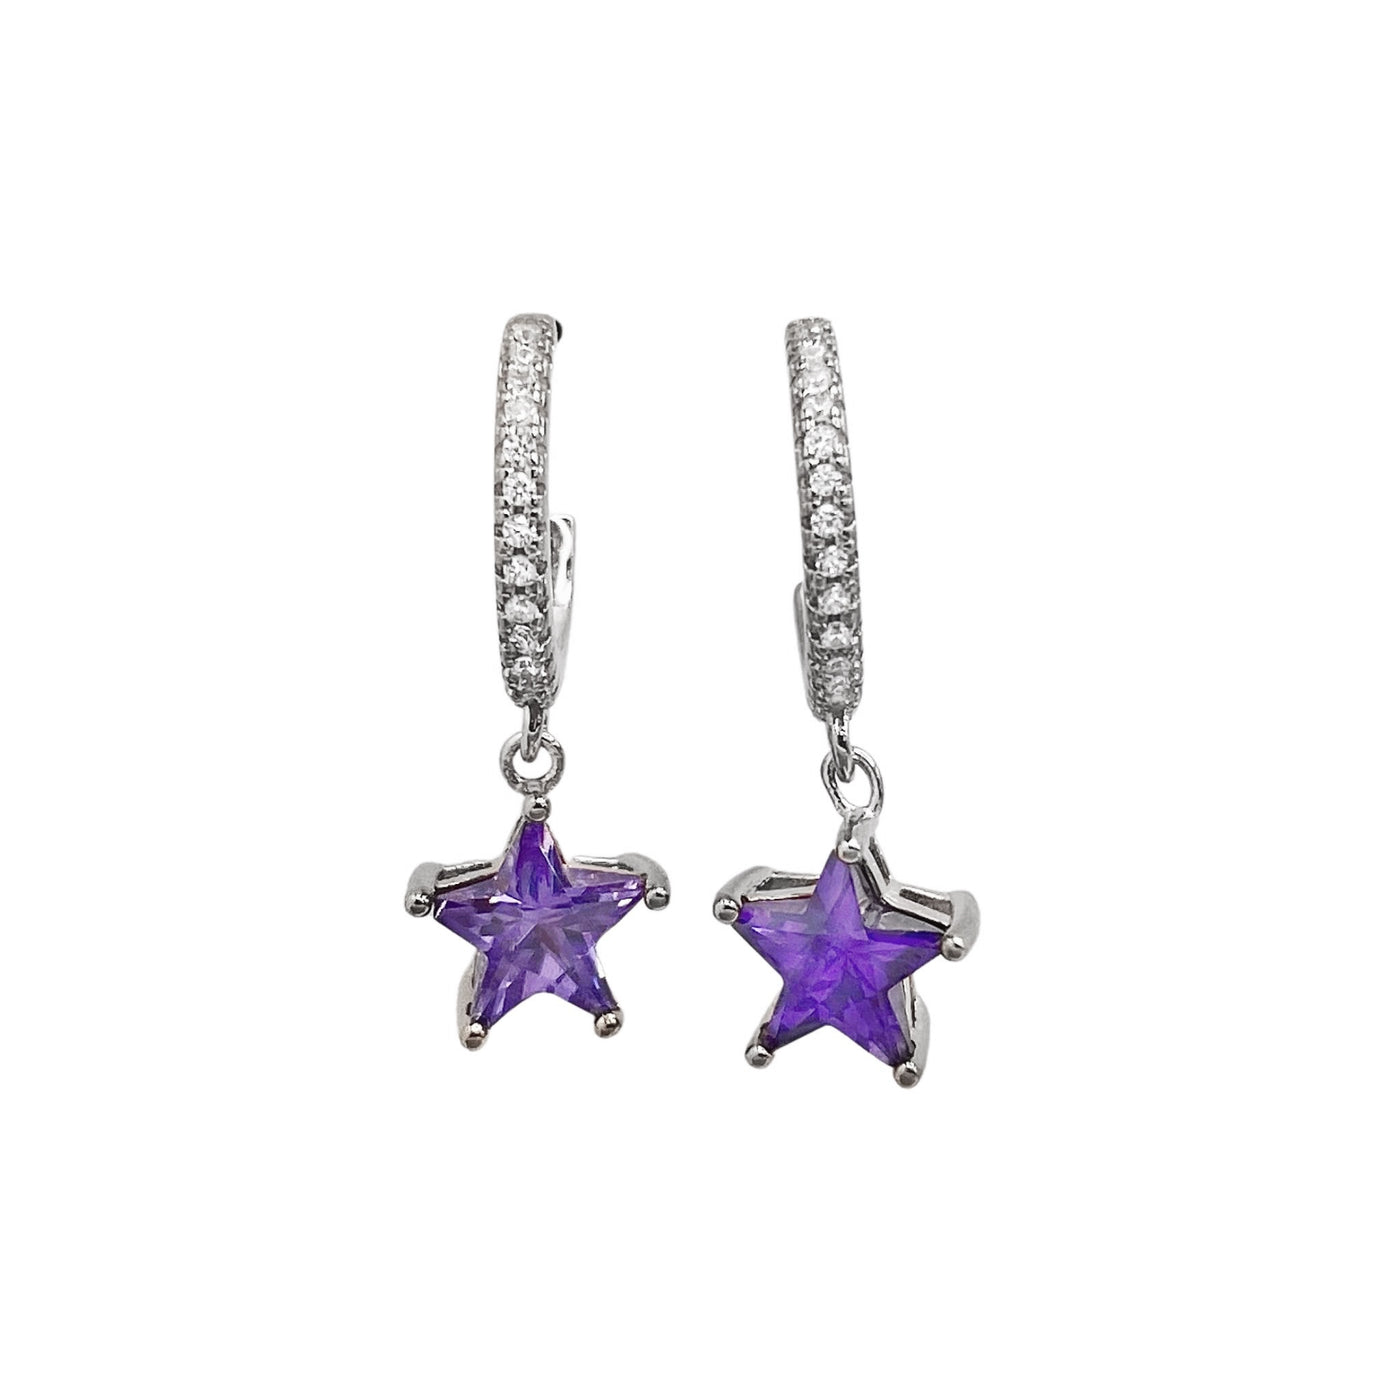 Silver earrings with star charm - 7 mm - rhodium